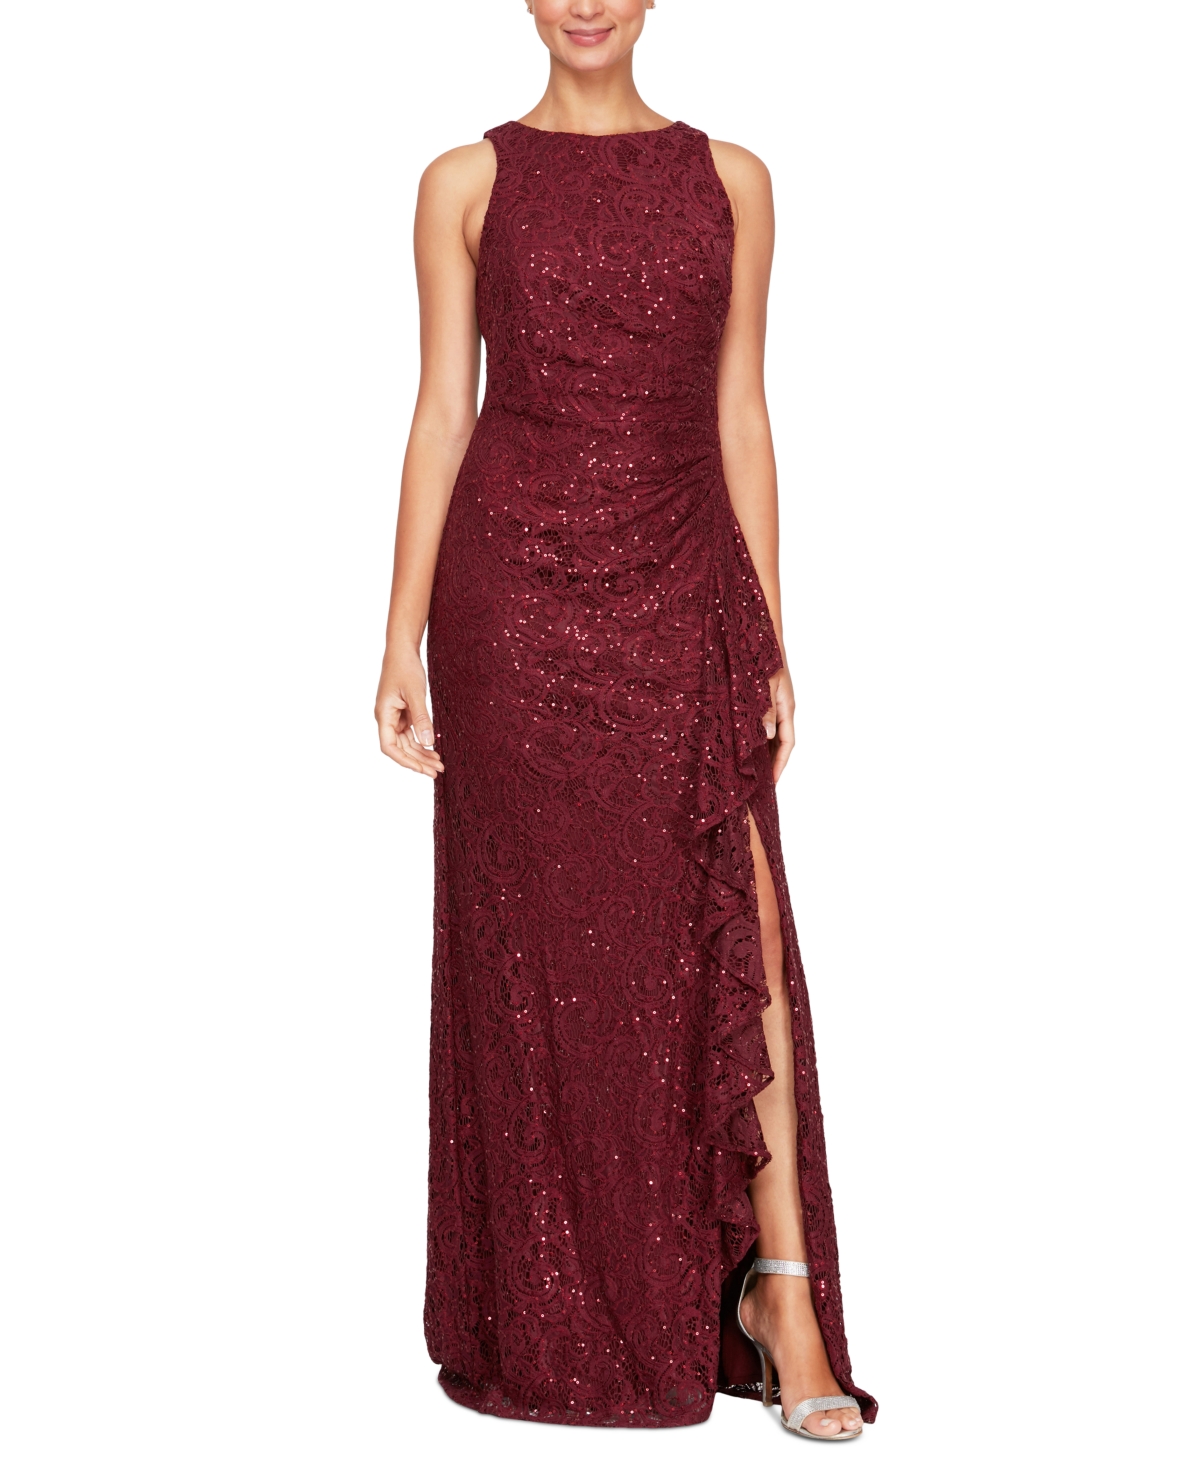 ALEX EVENINGS PETITE LACE SIDE-RUFFLE GOWN